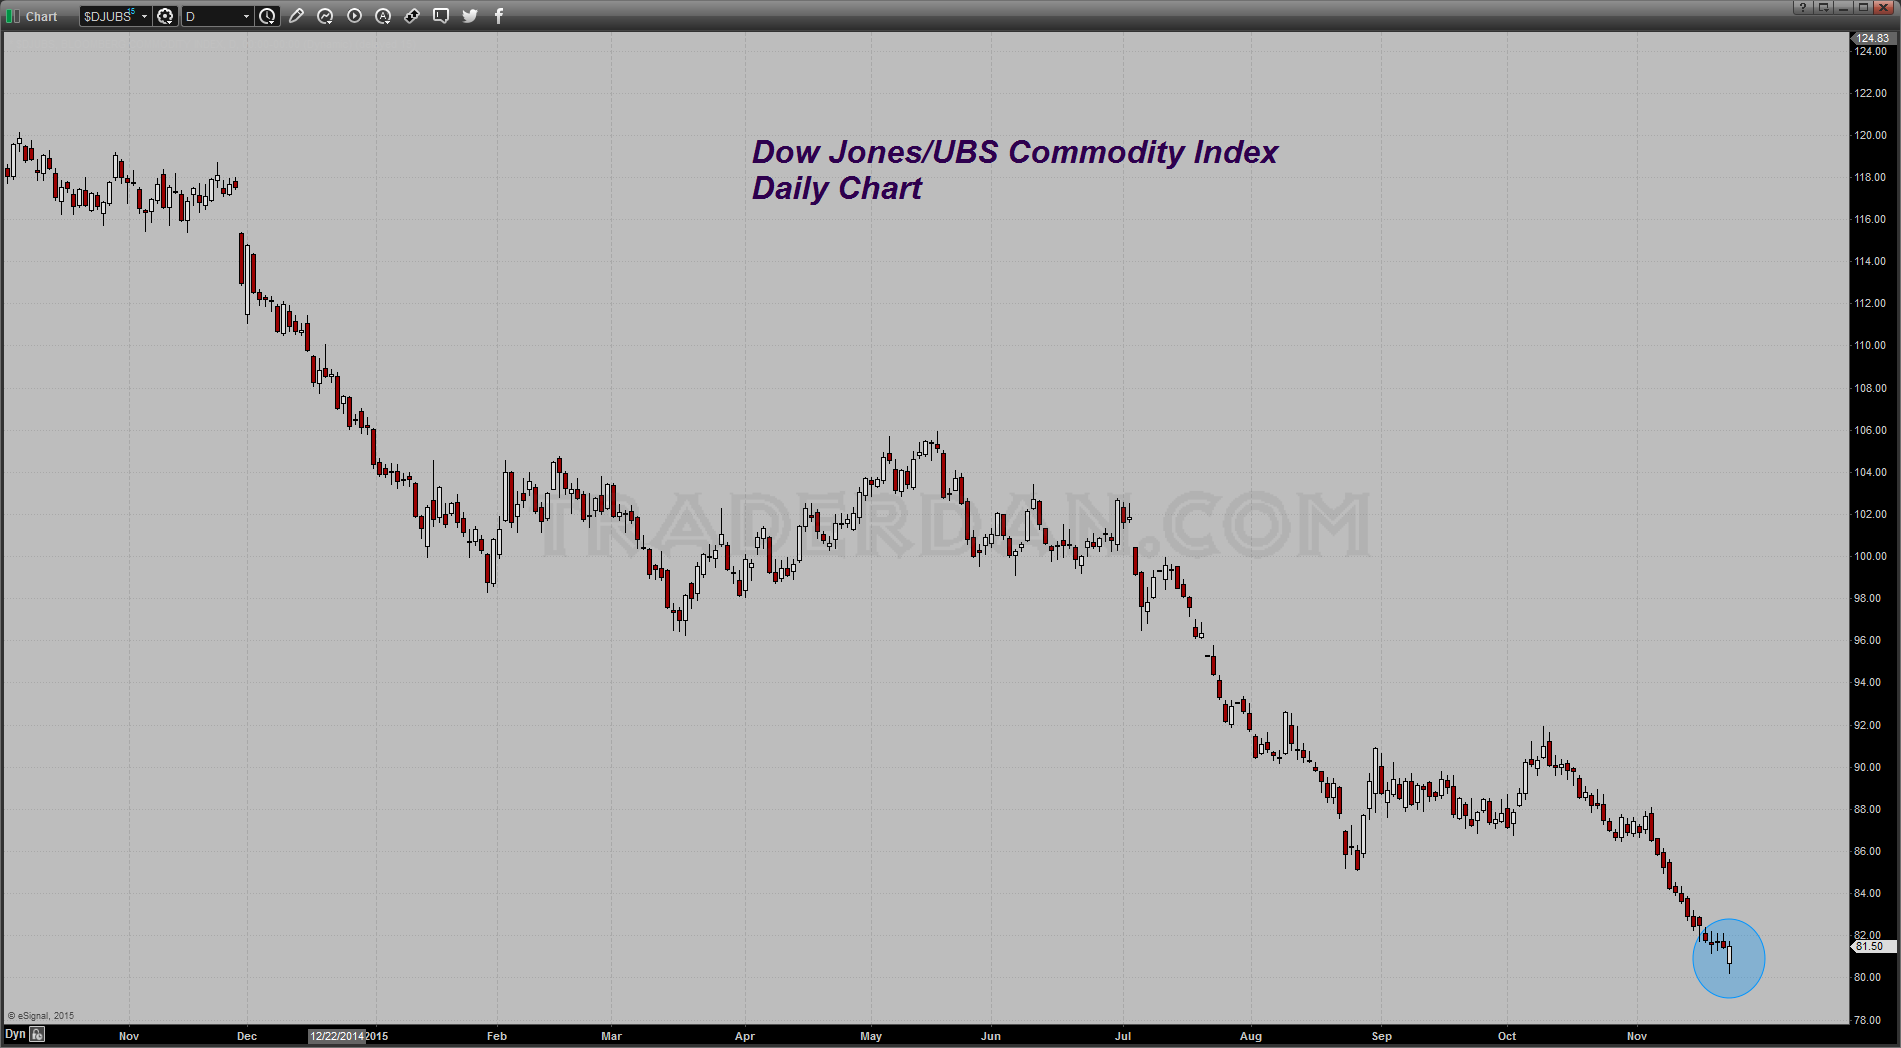 Dow Jones/UBS Commodity Index Daily